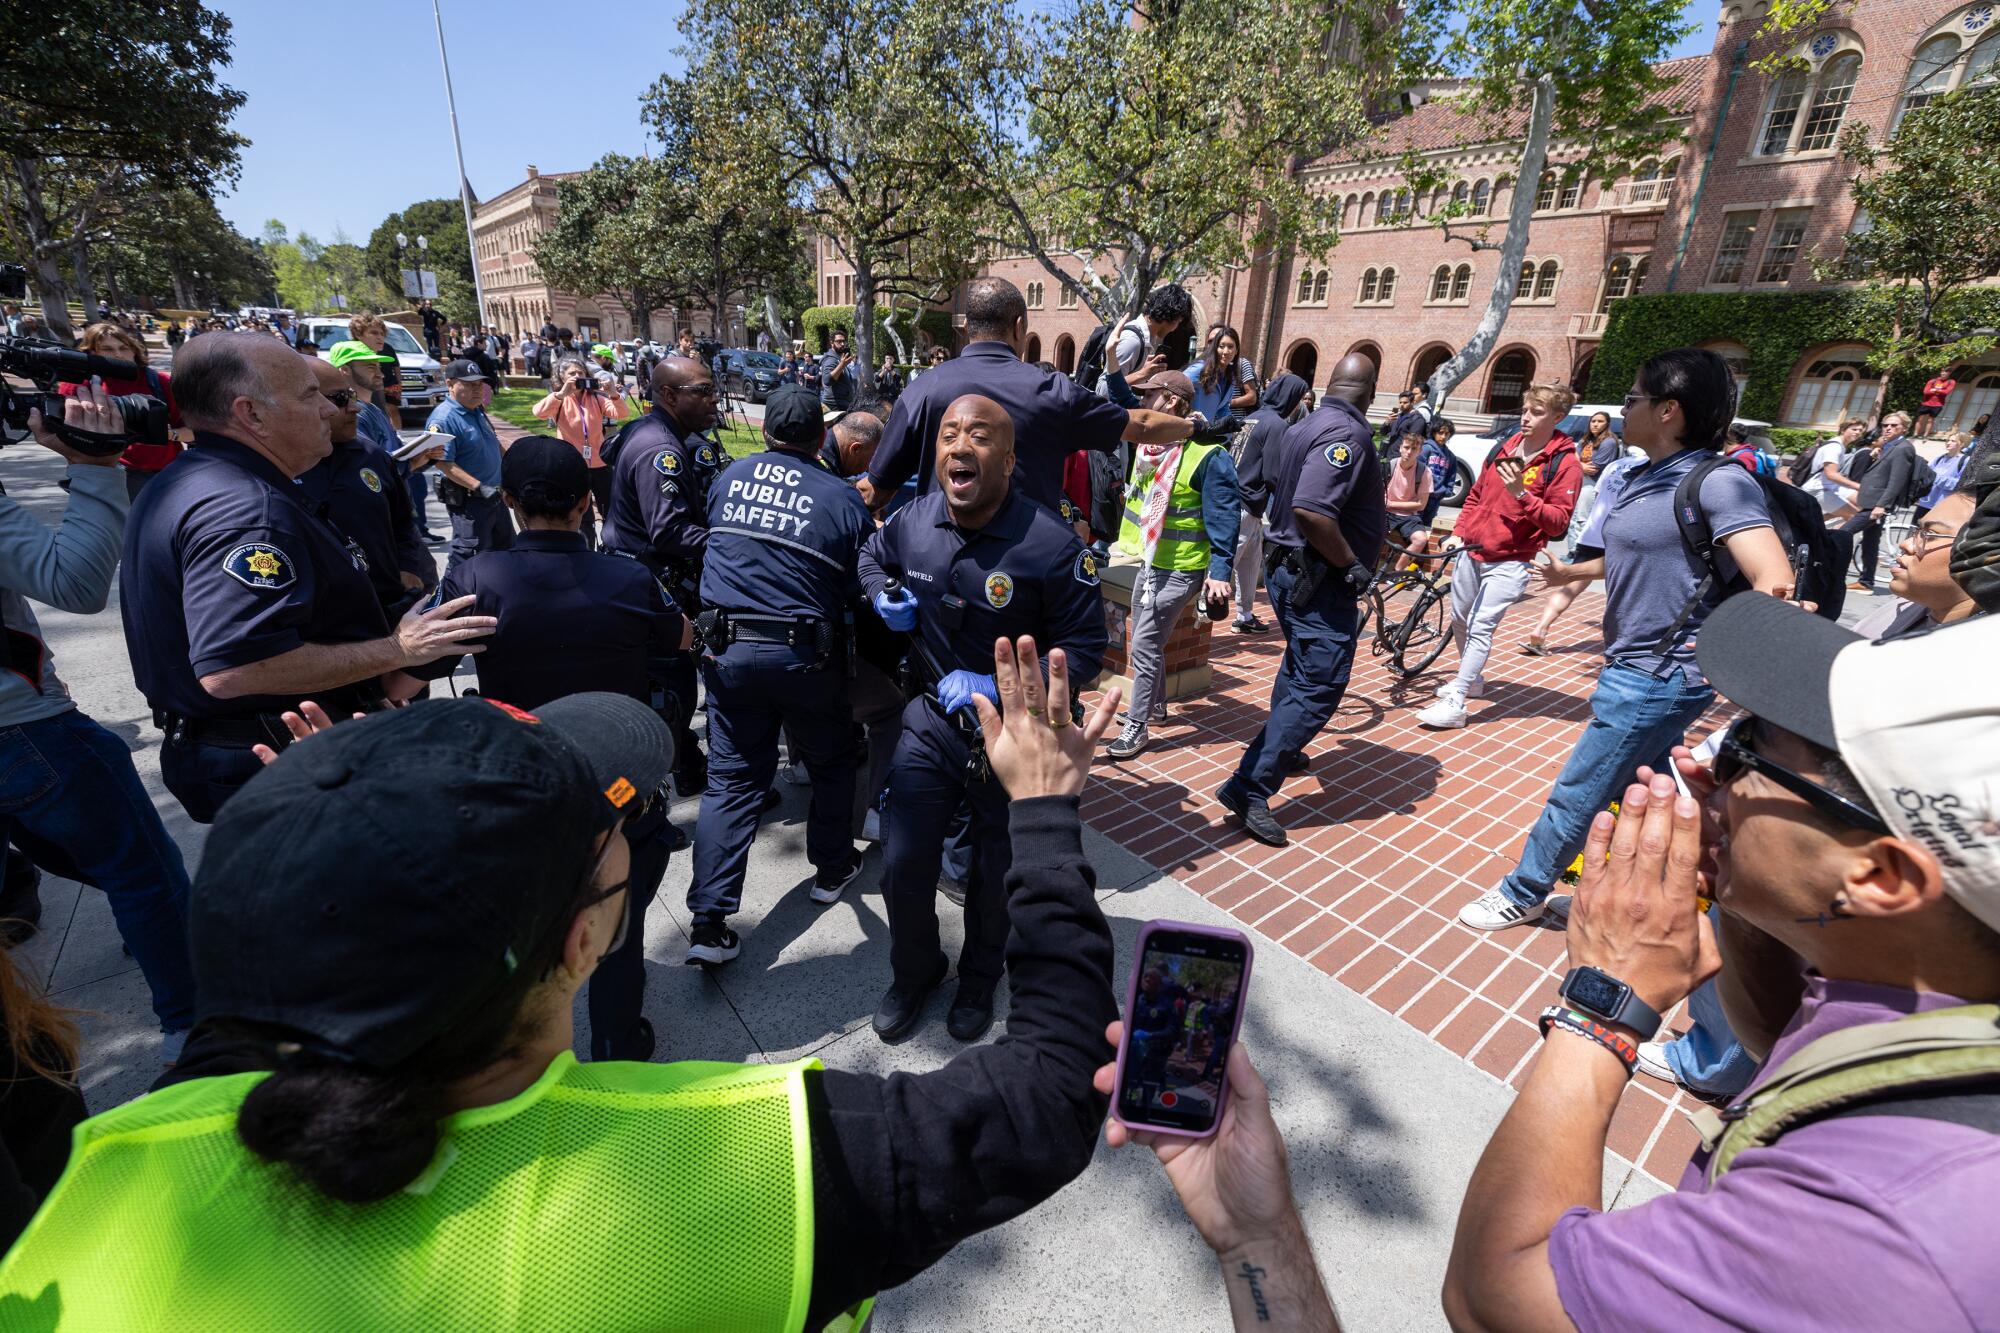 Public safety officers confront student protesters